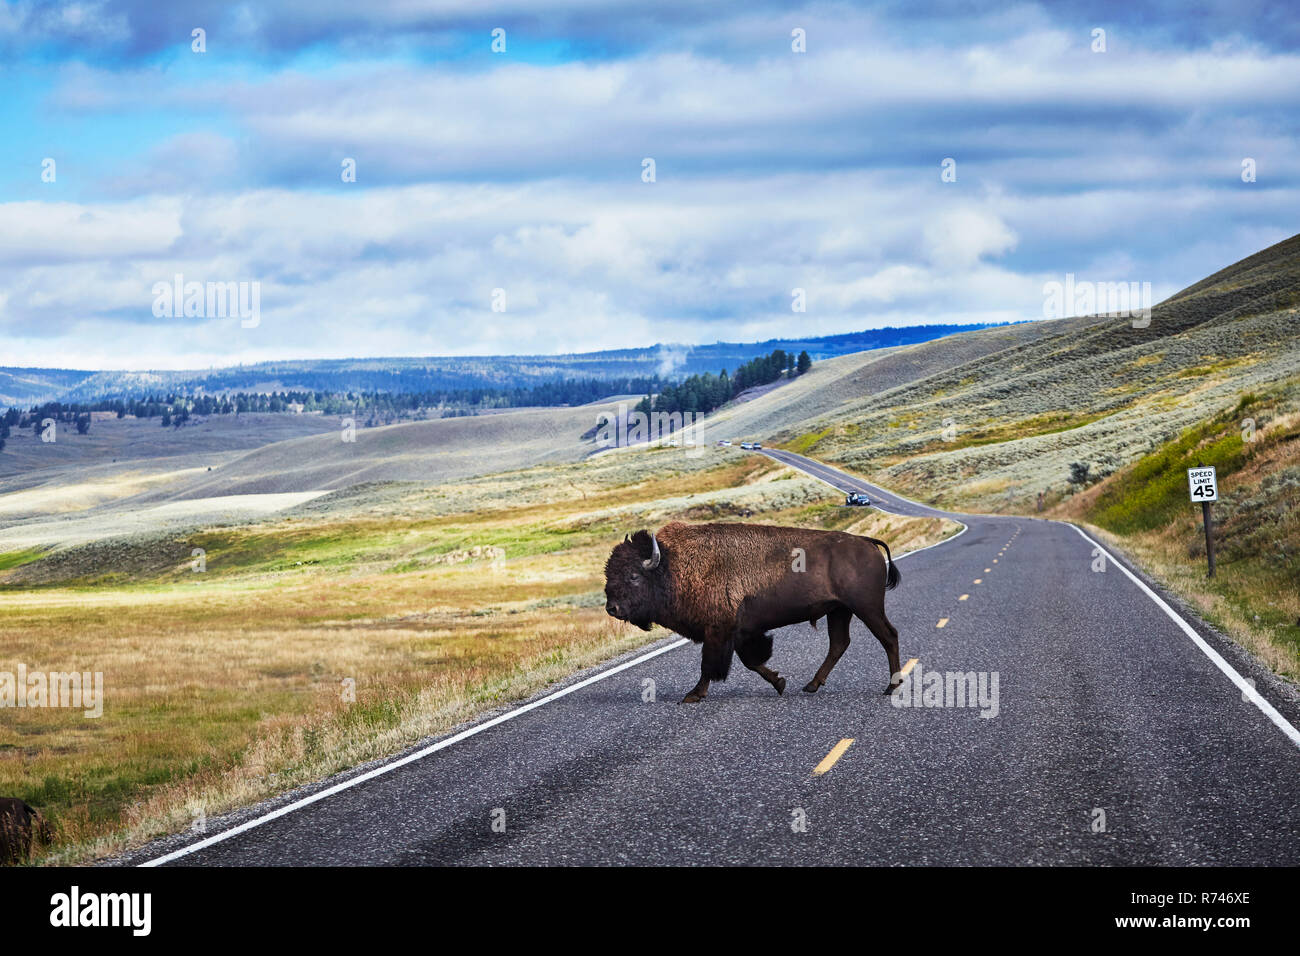 Bison crossing road, le Parc National de Yellowstone, Canyon Village, Wyoming, USA Banque D'Images